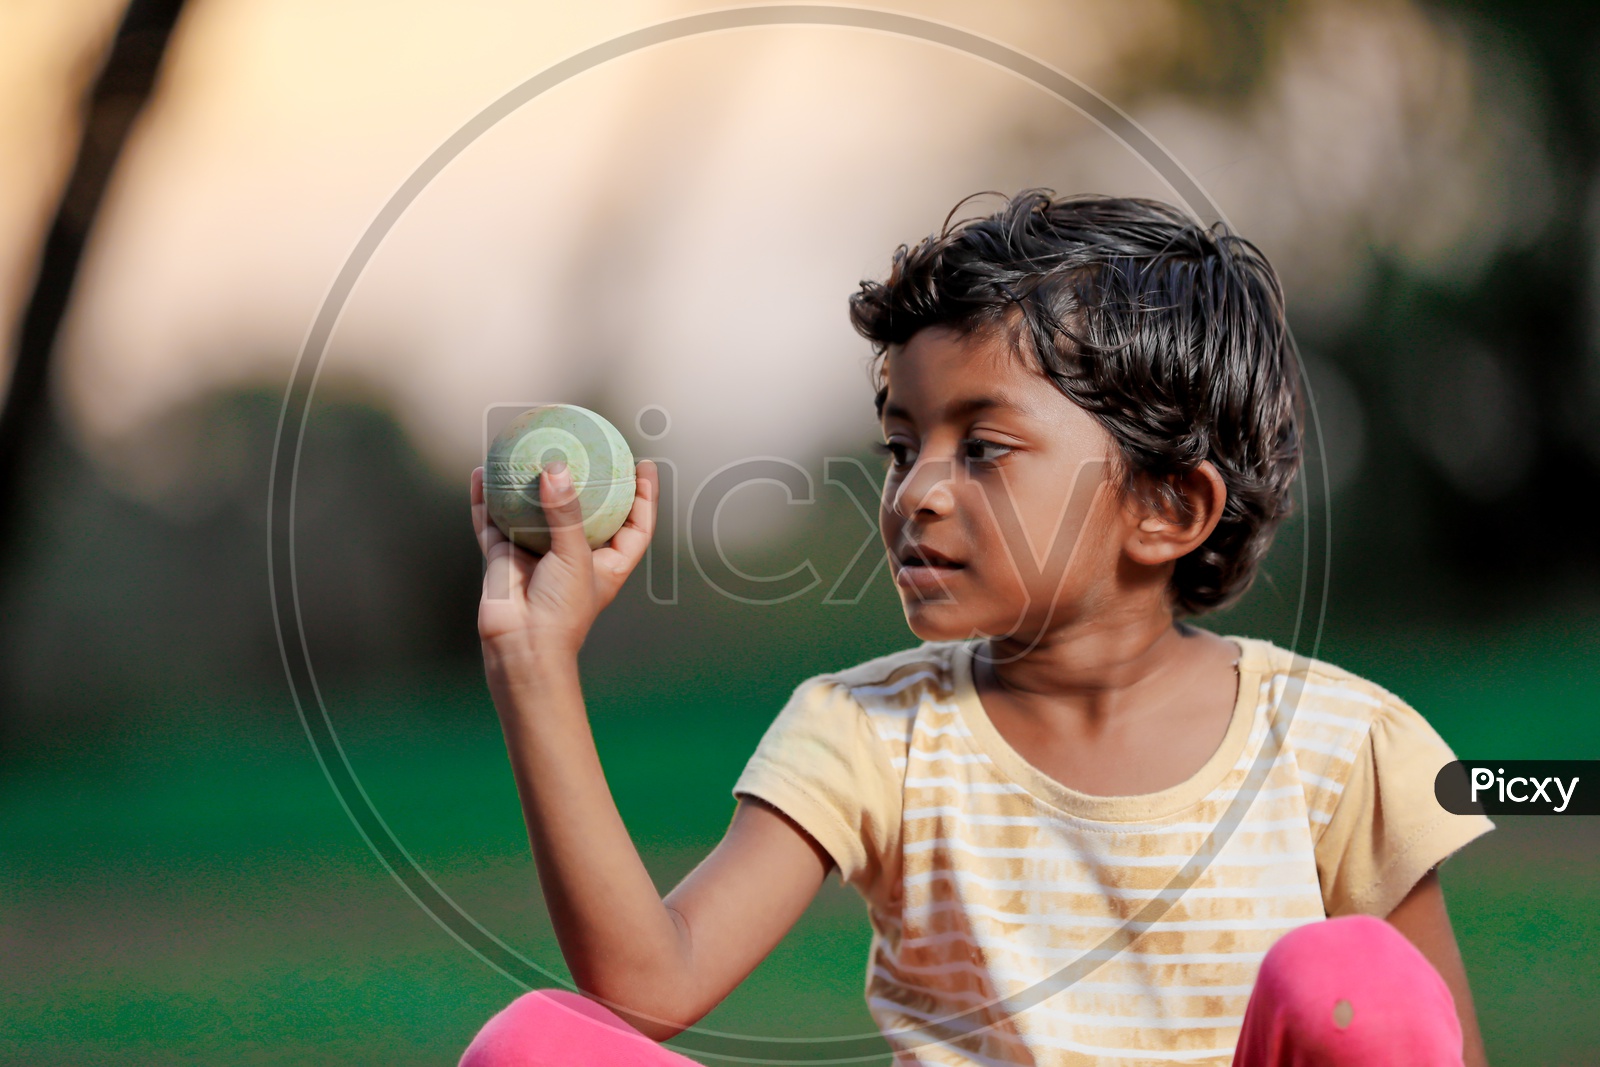 Indian Girl Child Playing with a Cricket ball